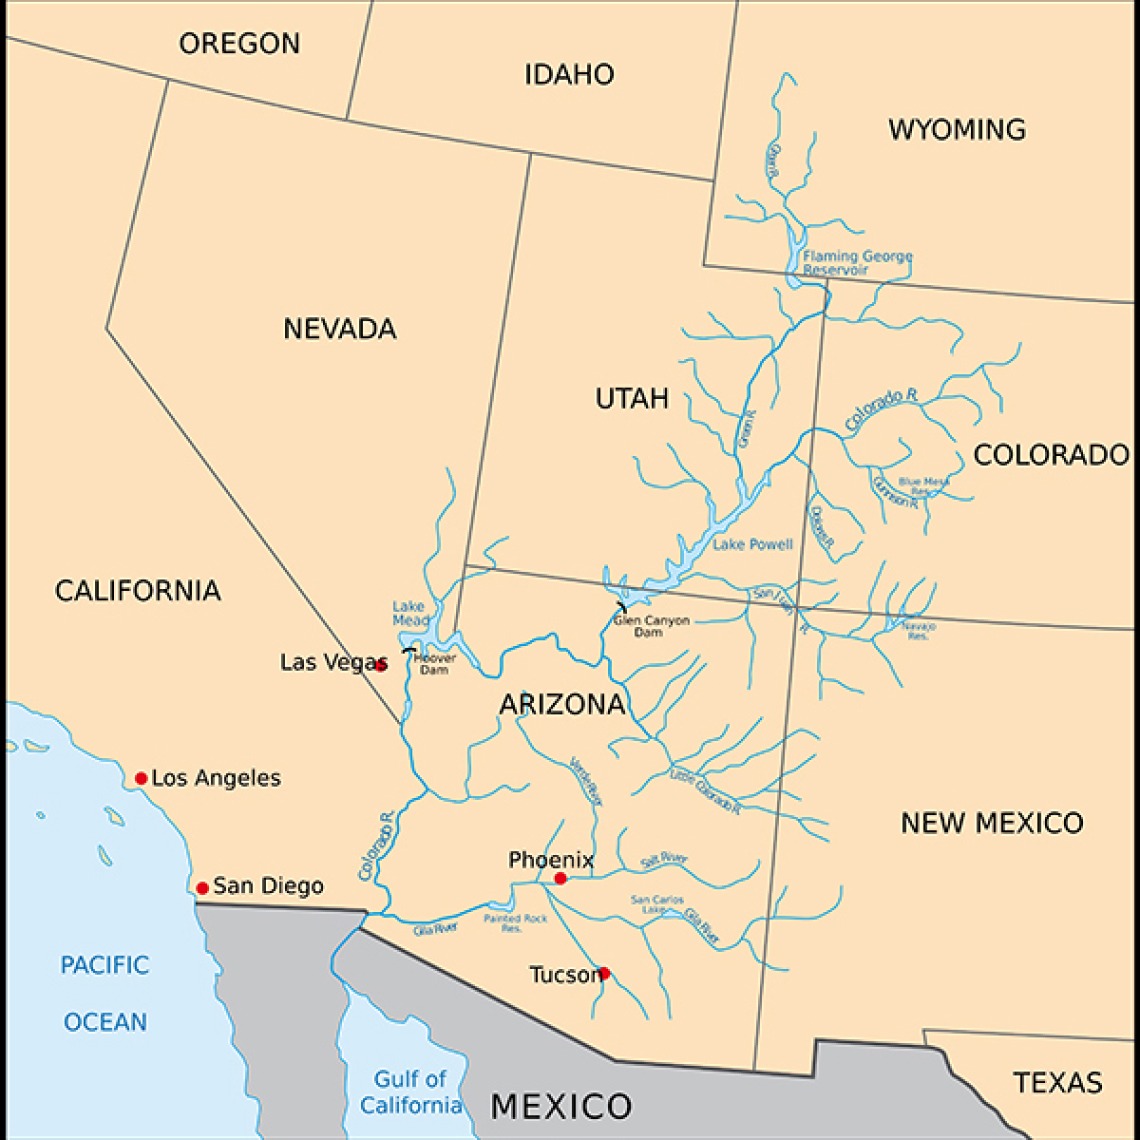 A map of the southwestern United States in beige with the Colorado River and its tributaries highlighted in light blue. Shows the river flowing from Wyoming, south into Utah and Colorado, then in to Nevada, California, Arizona and New Mexico before reaching its terminus in the Gulf of California.